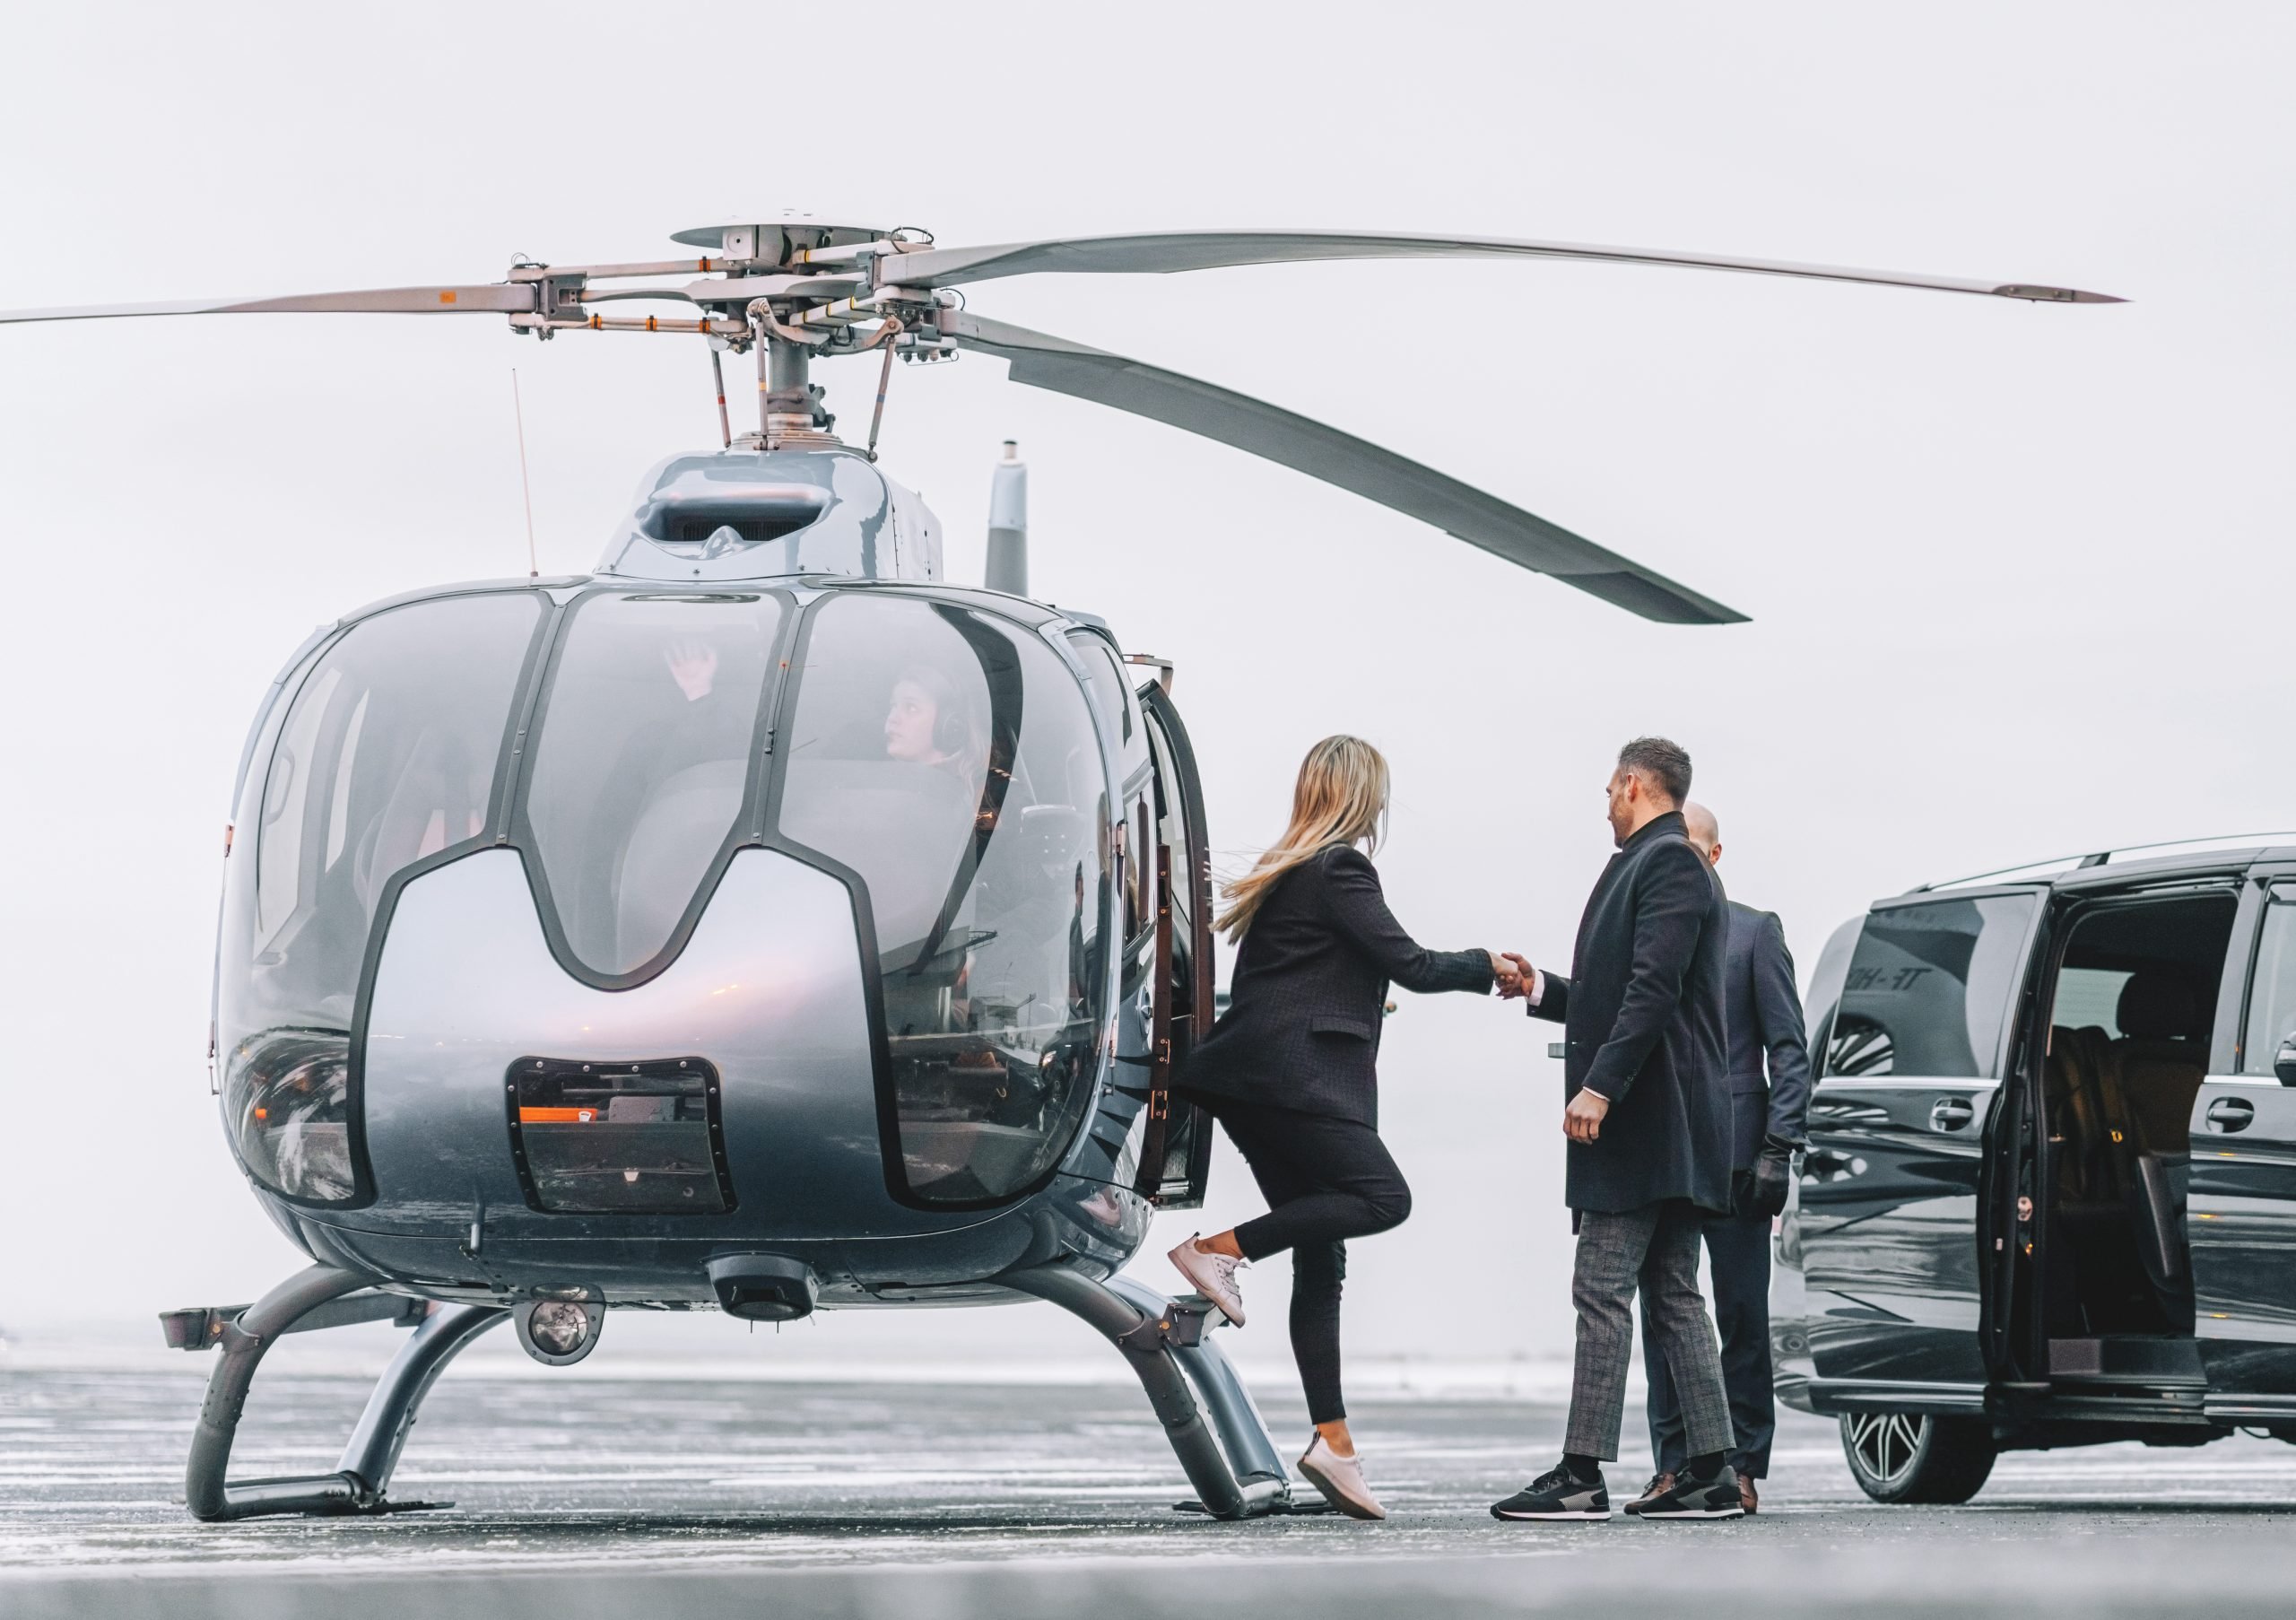 Woman getting down the helicopter with the help from a man with their chauffeur waiting by the car on the helipad. Couple disembarking their helicopter with chauffeur standing by.